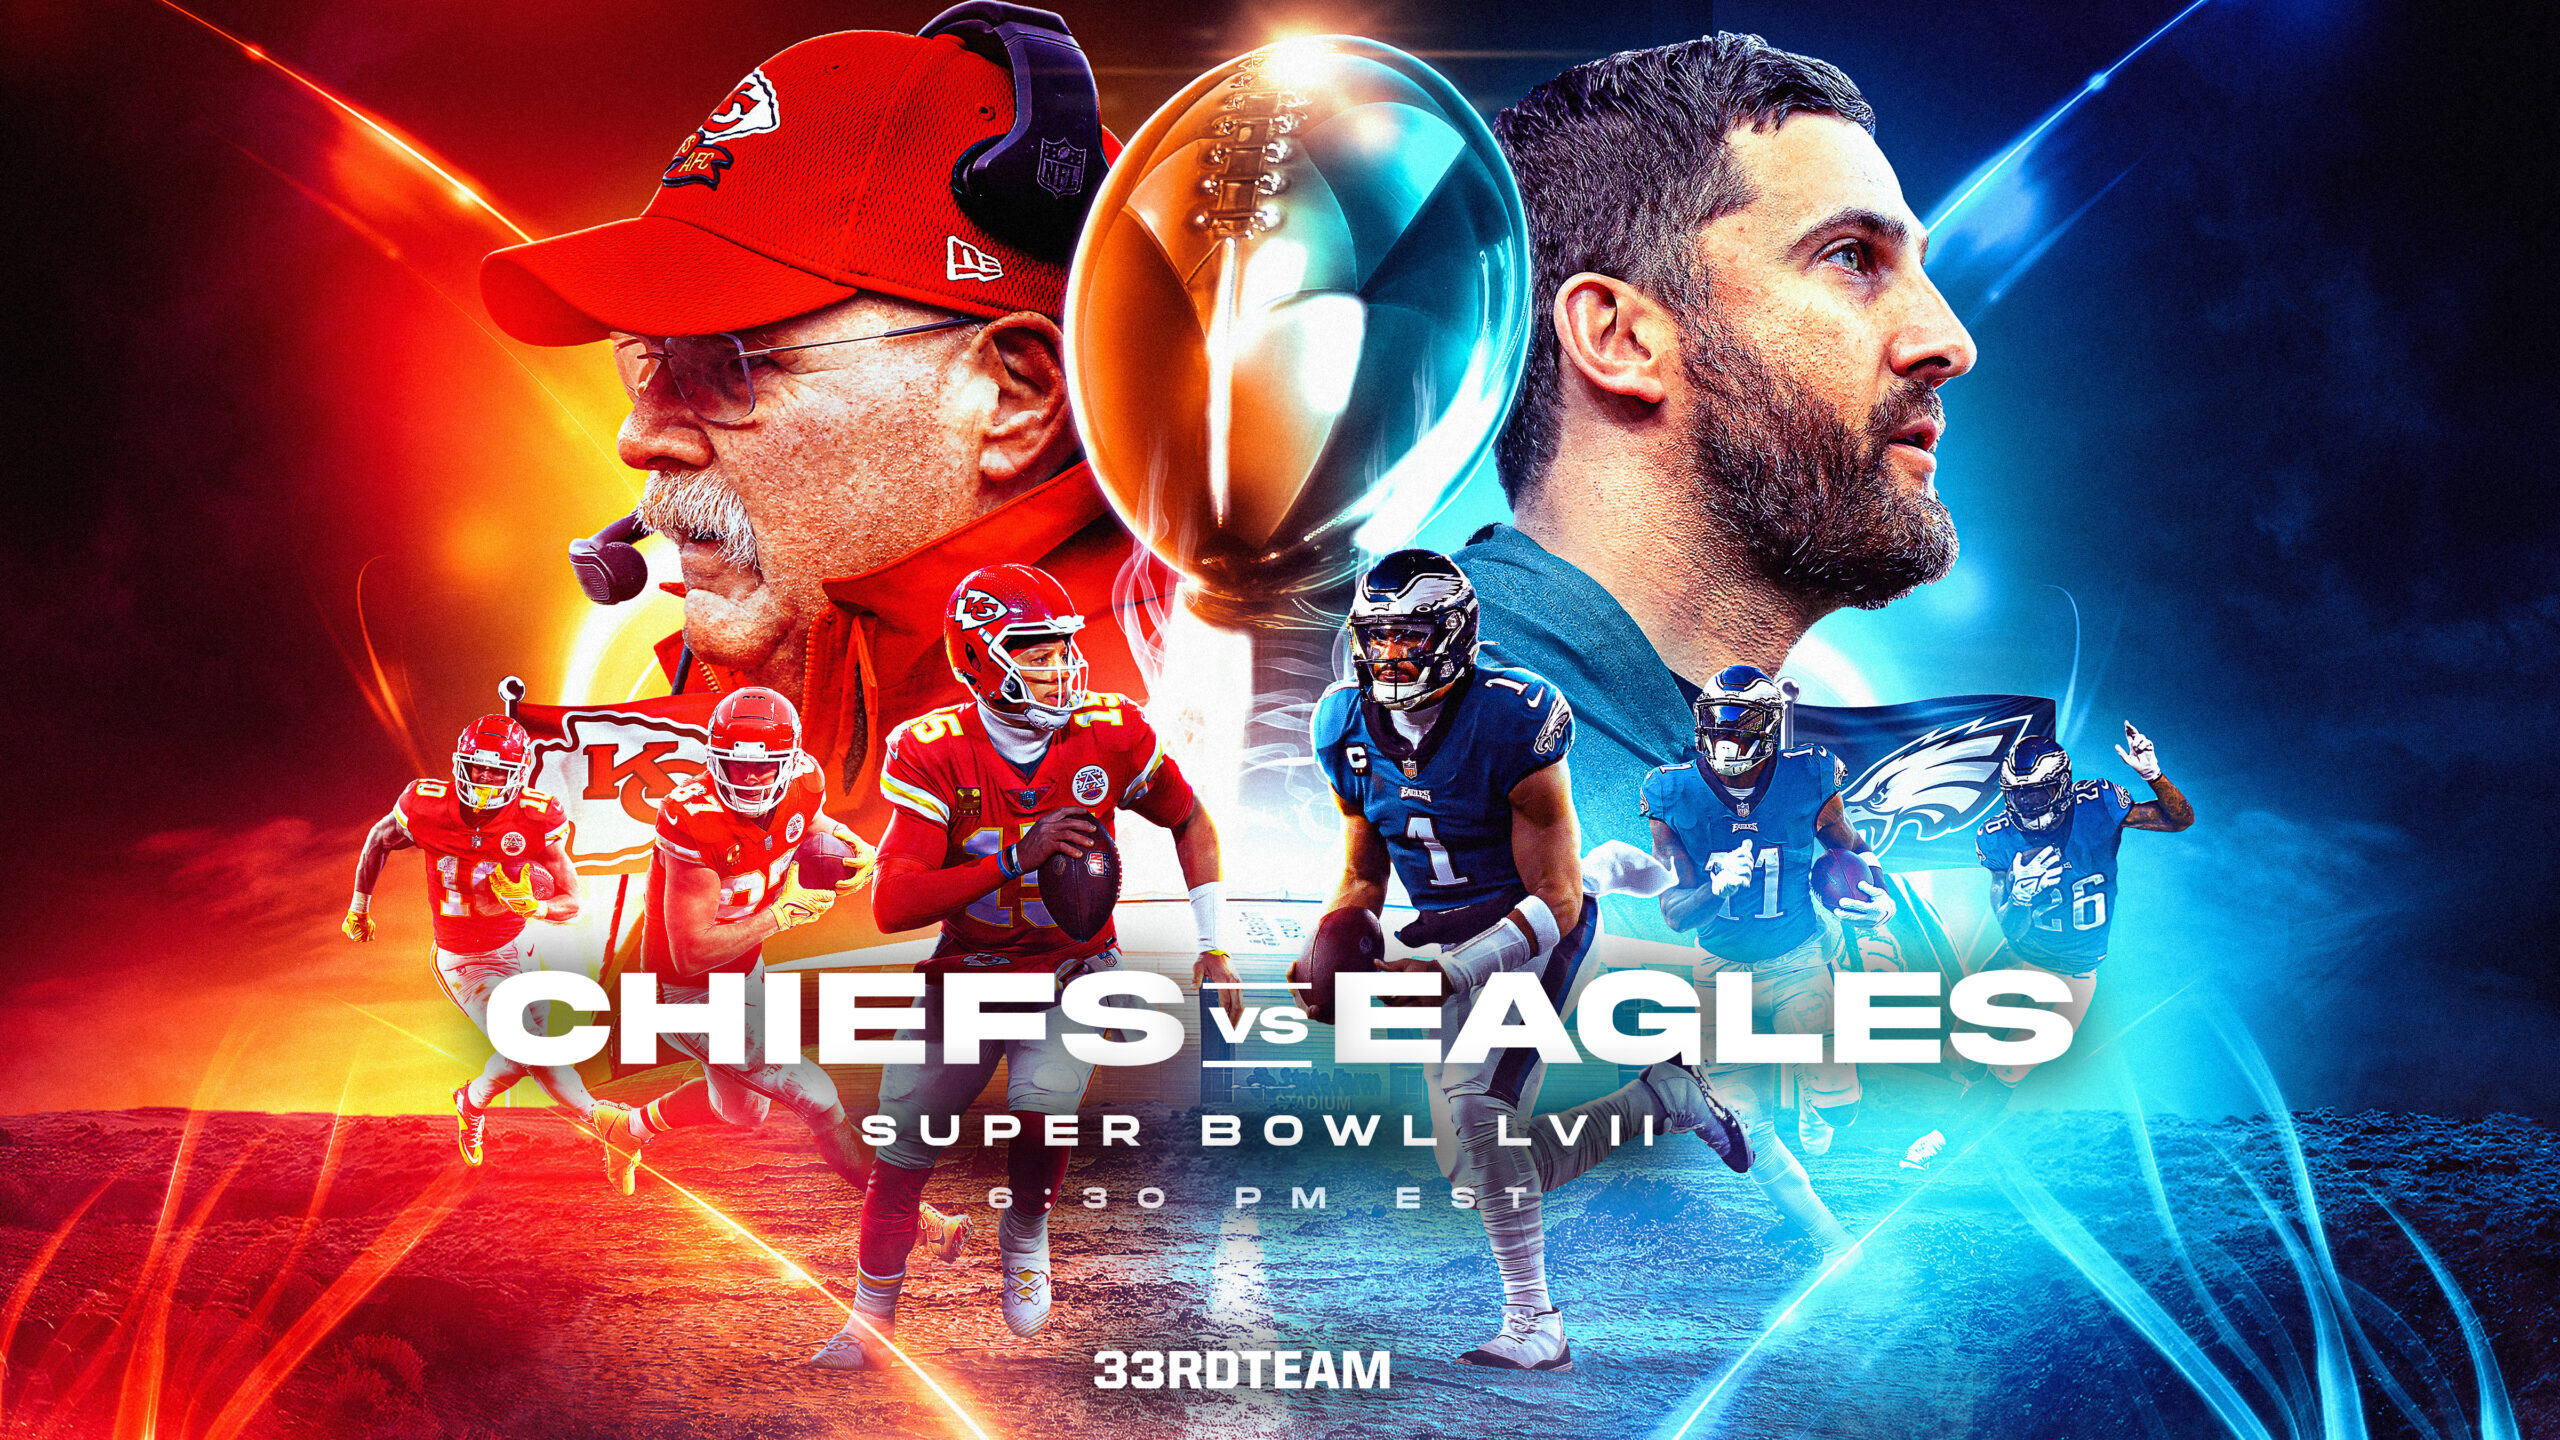 Super Bowl LVII Expert Predictions: Will Chiefs or Eagles Win Lombardi Trophy?